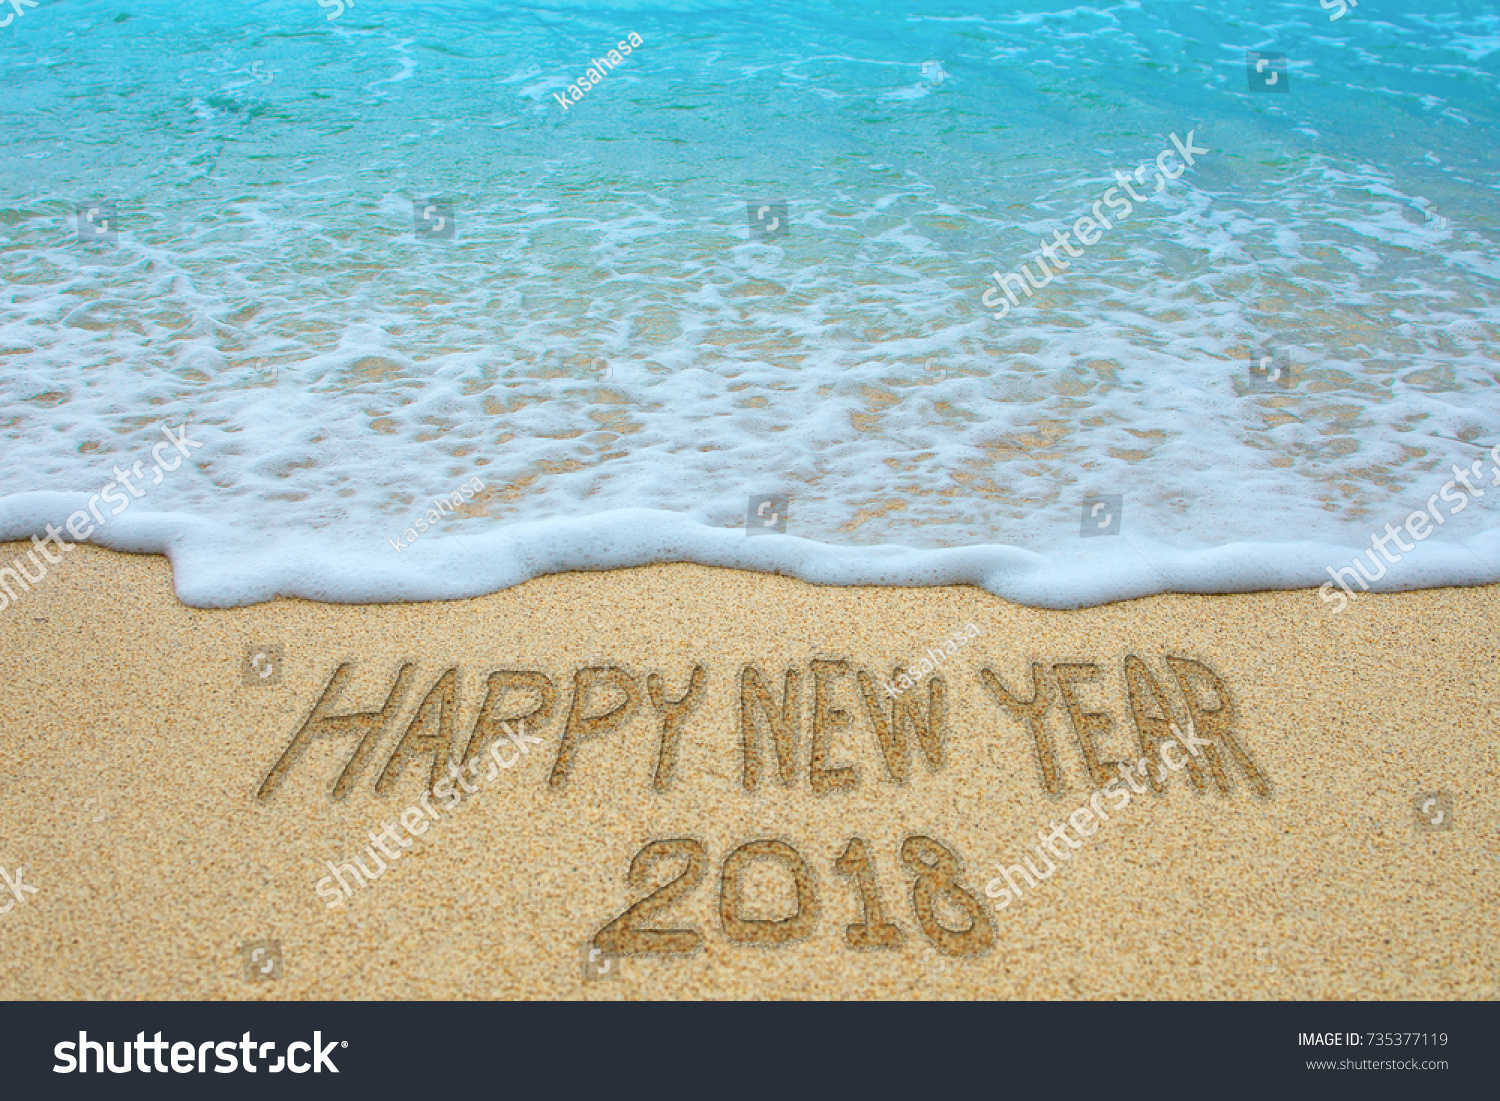 Happy new year 2018 written on sandy beach, New Year 2018 is coming concept. #735377119